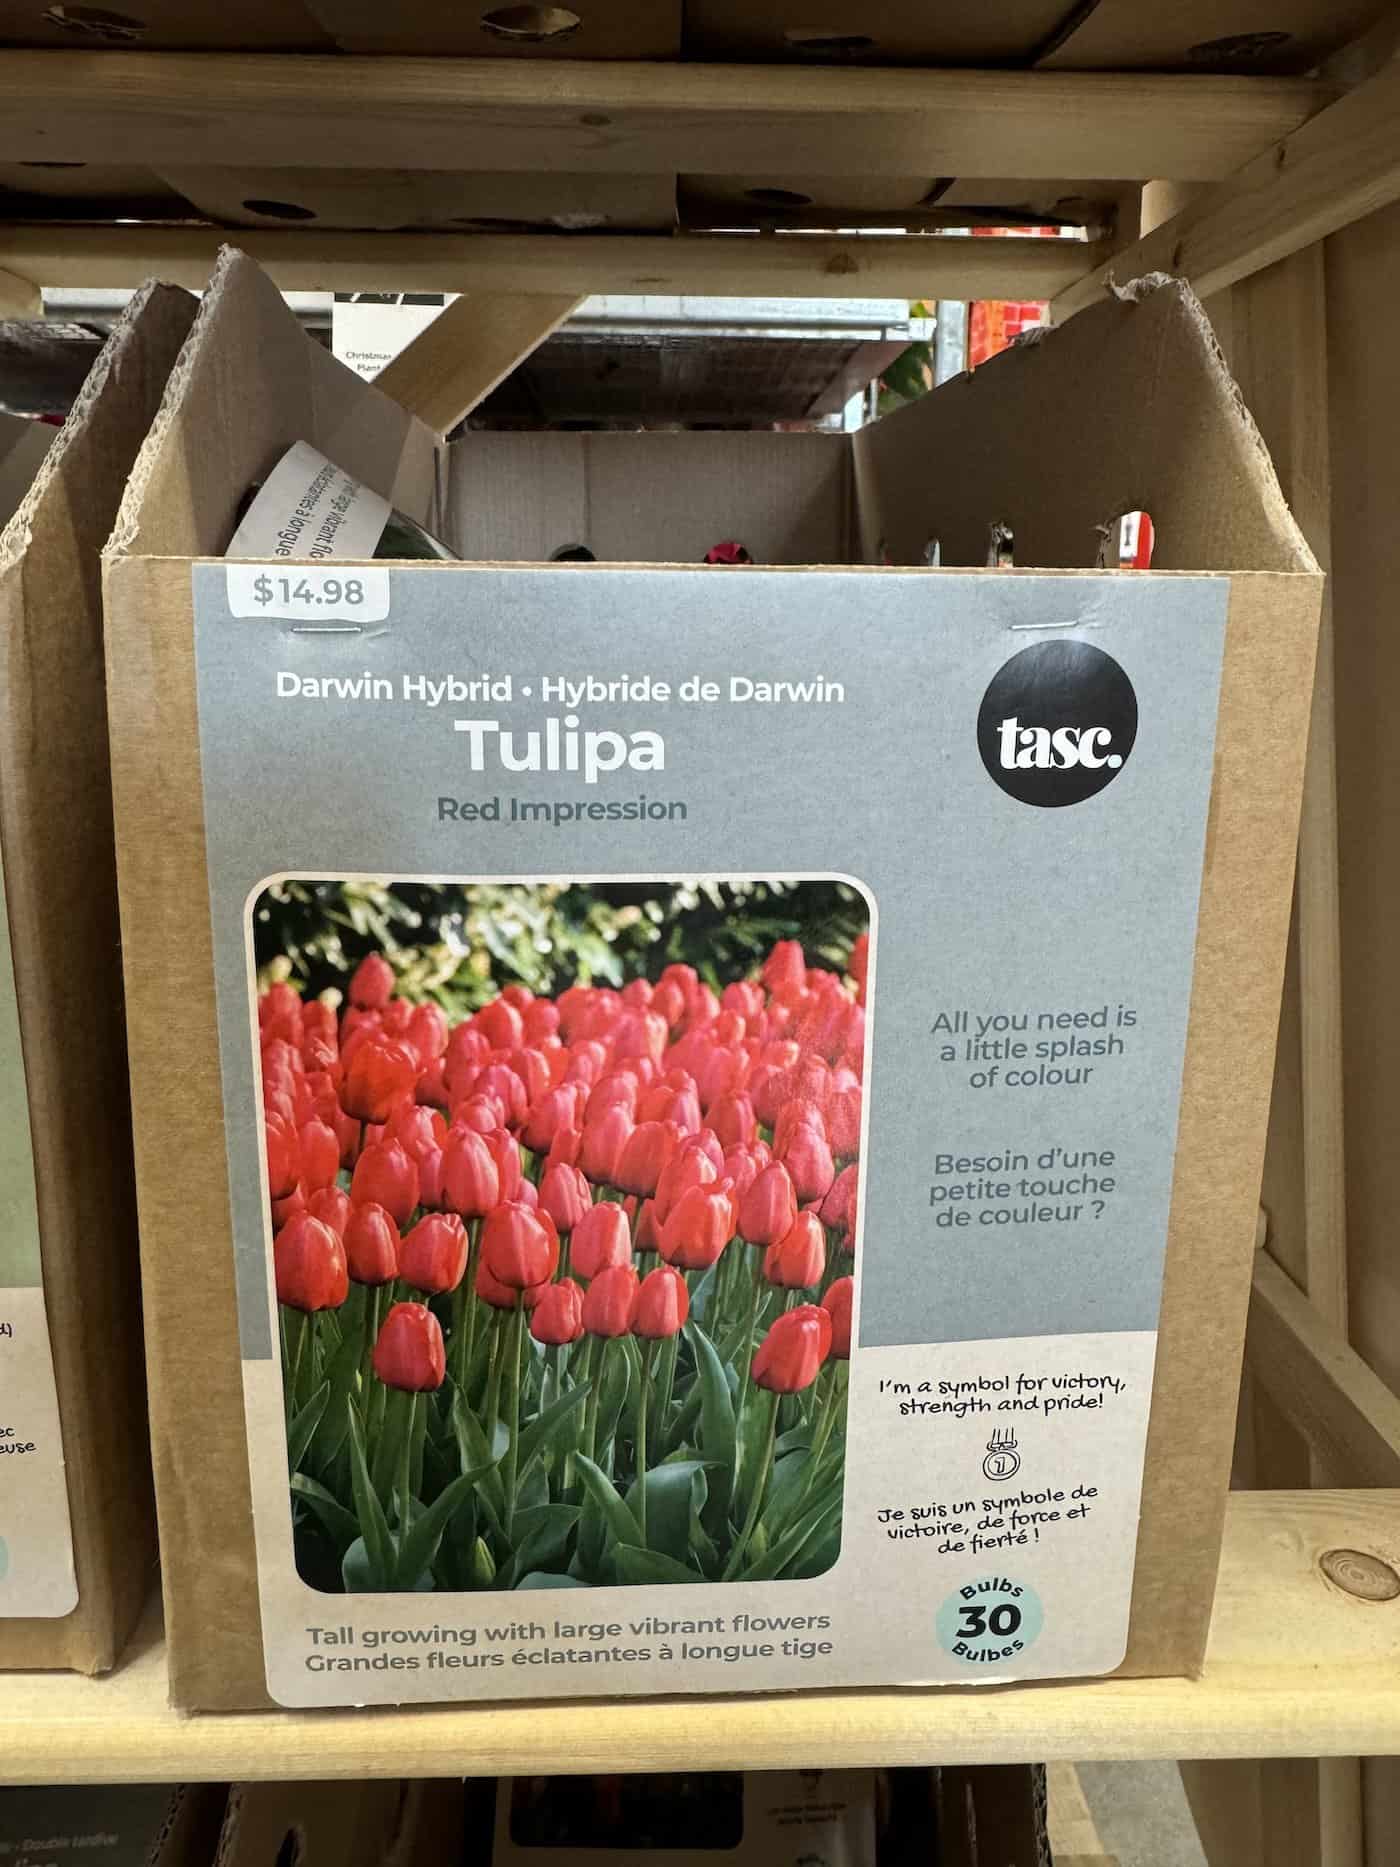 Darwin hybrid tulips for sale in the fall at home depot